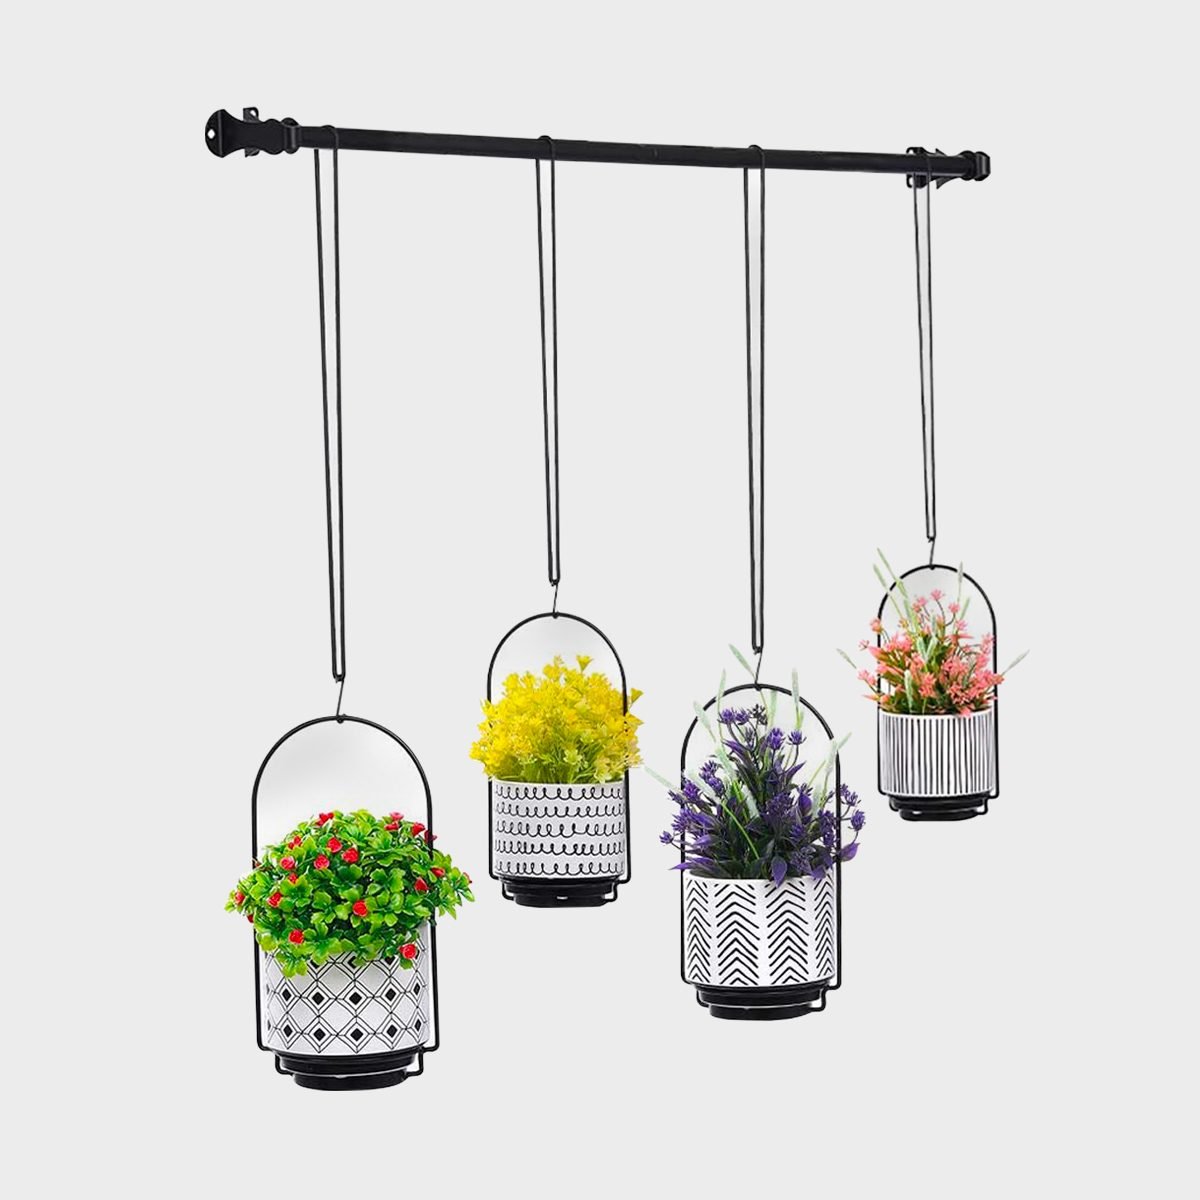 Hibsr Hanging Planters For Window And Walls With 4 Plants Pots Ecomm Amazon.com